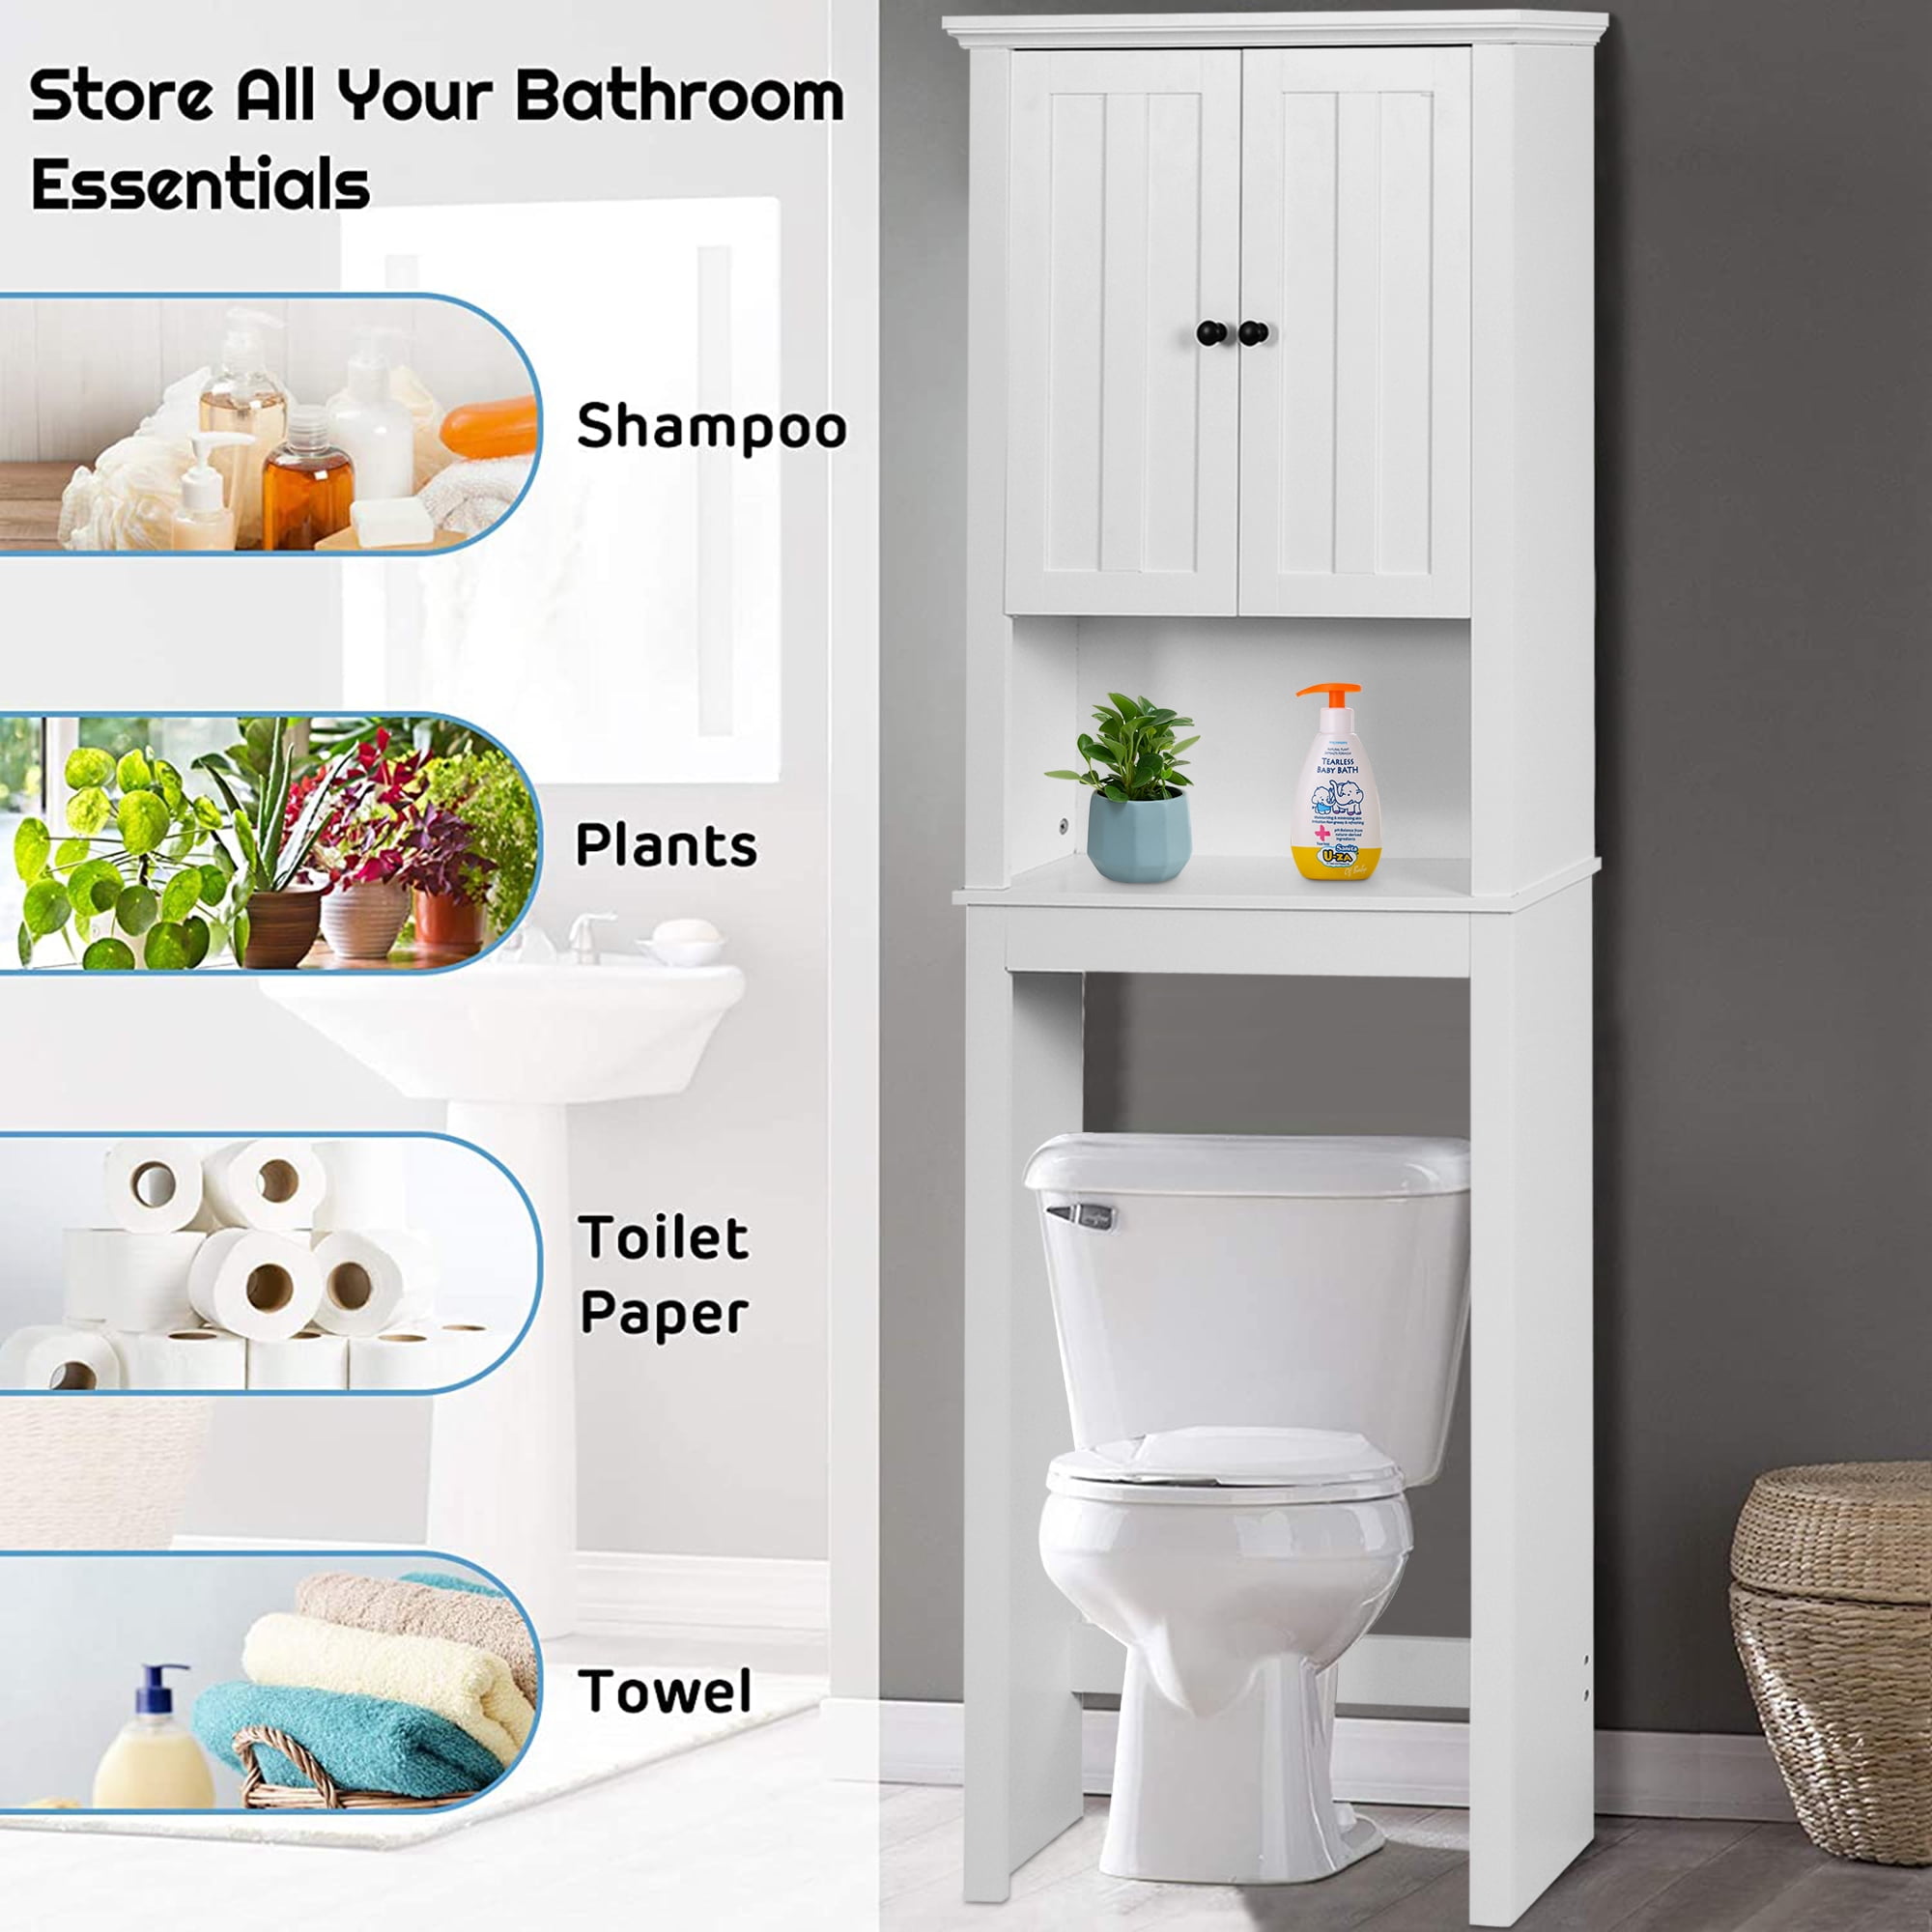 Nestl Bathroom Storage Organizer - Floor Standing with Shelves - Includes 2  Apothecary Jars - Tall Bathroom Storage Cabinet for Toilet Paper, Towel 